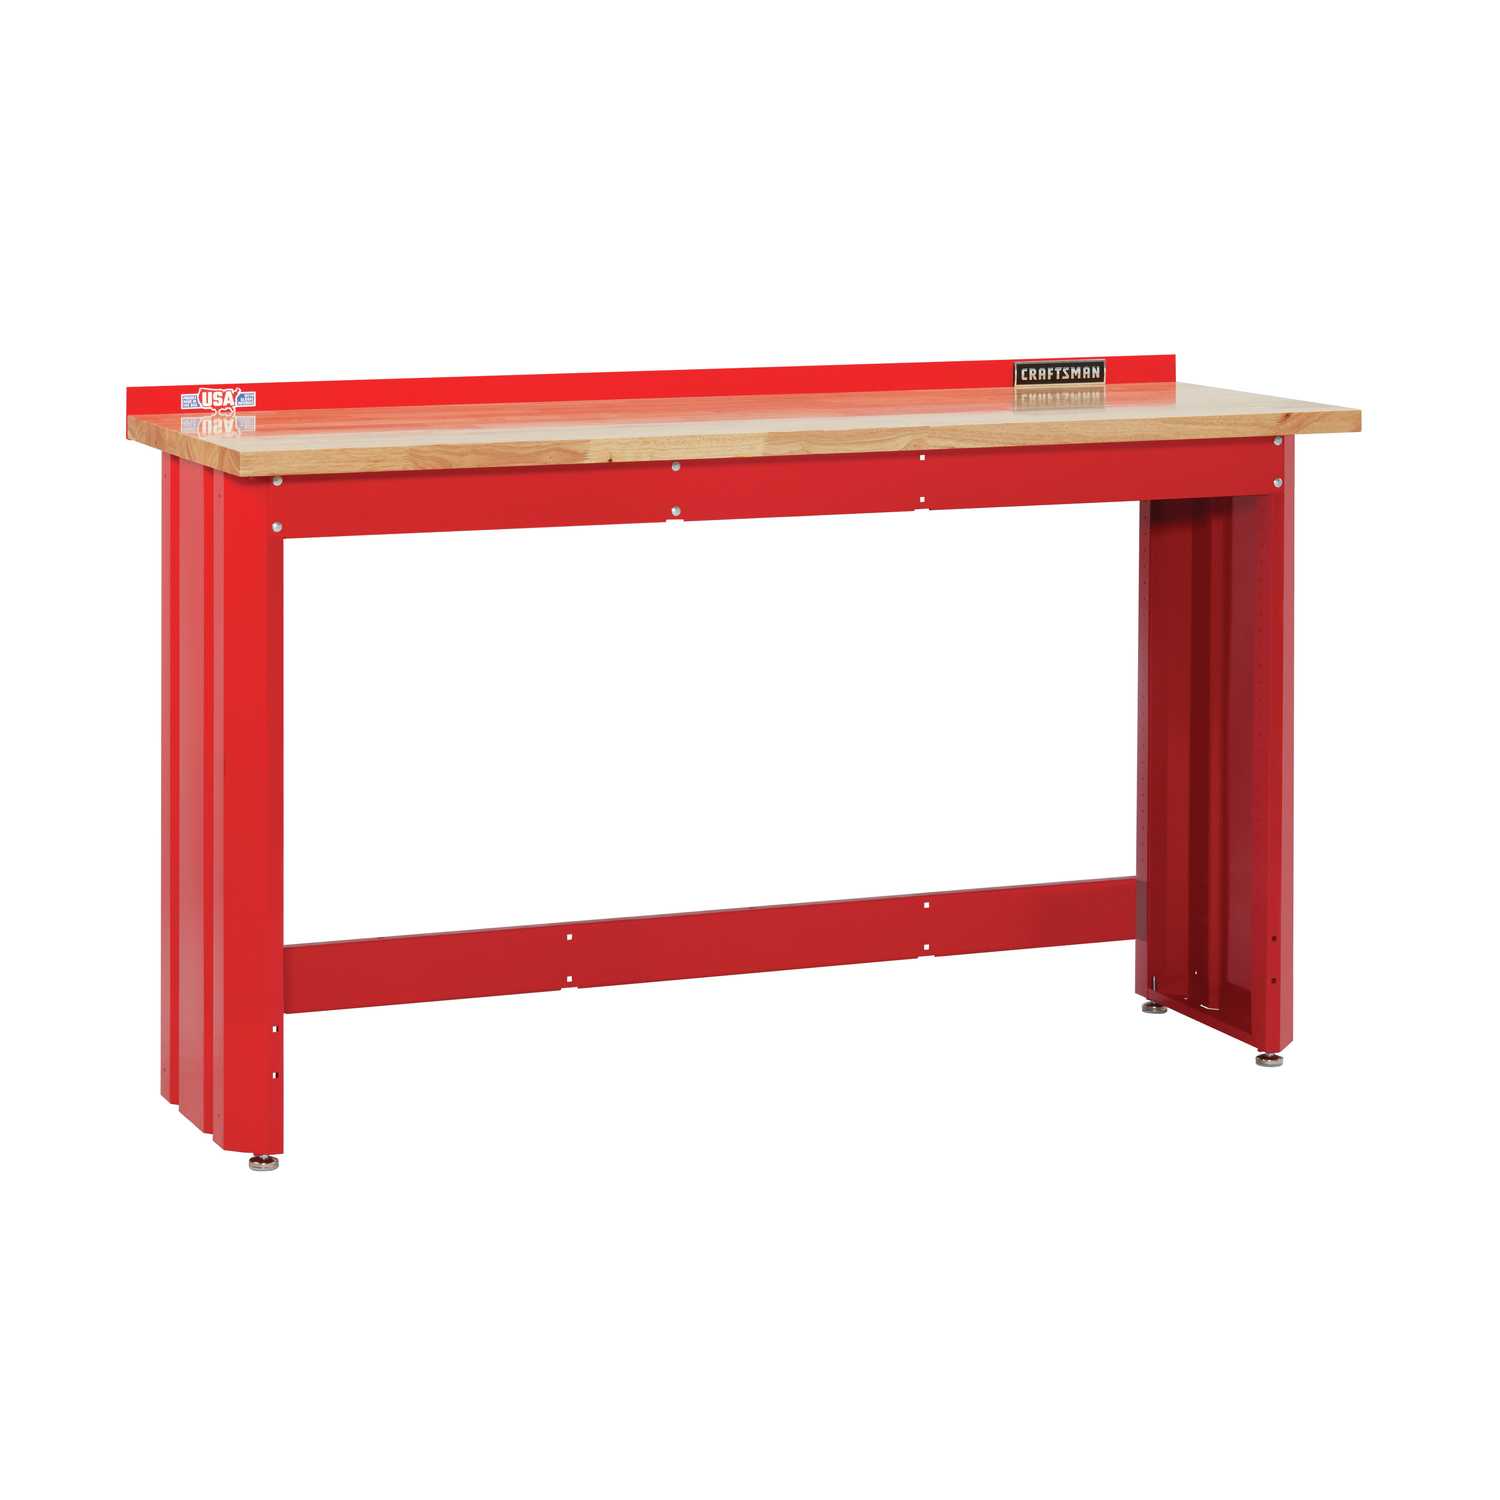 Craftsman 24 in. L x 6 ft. W x 41.25 in. H Workbench with 